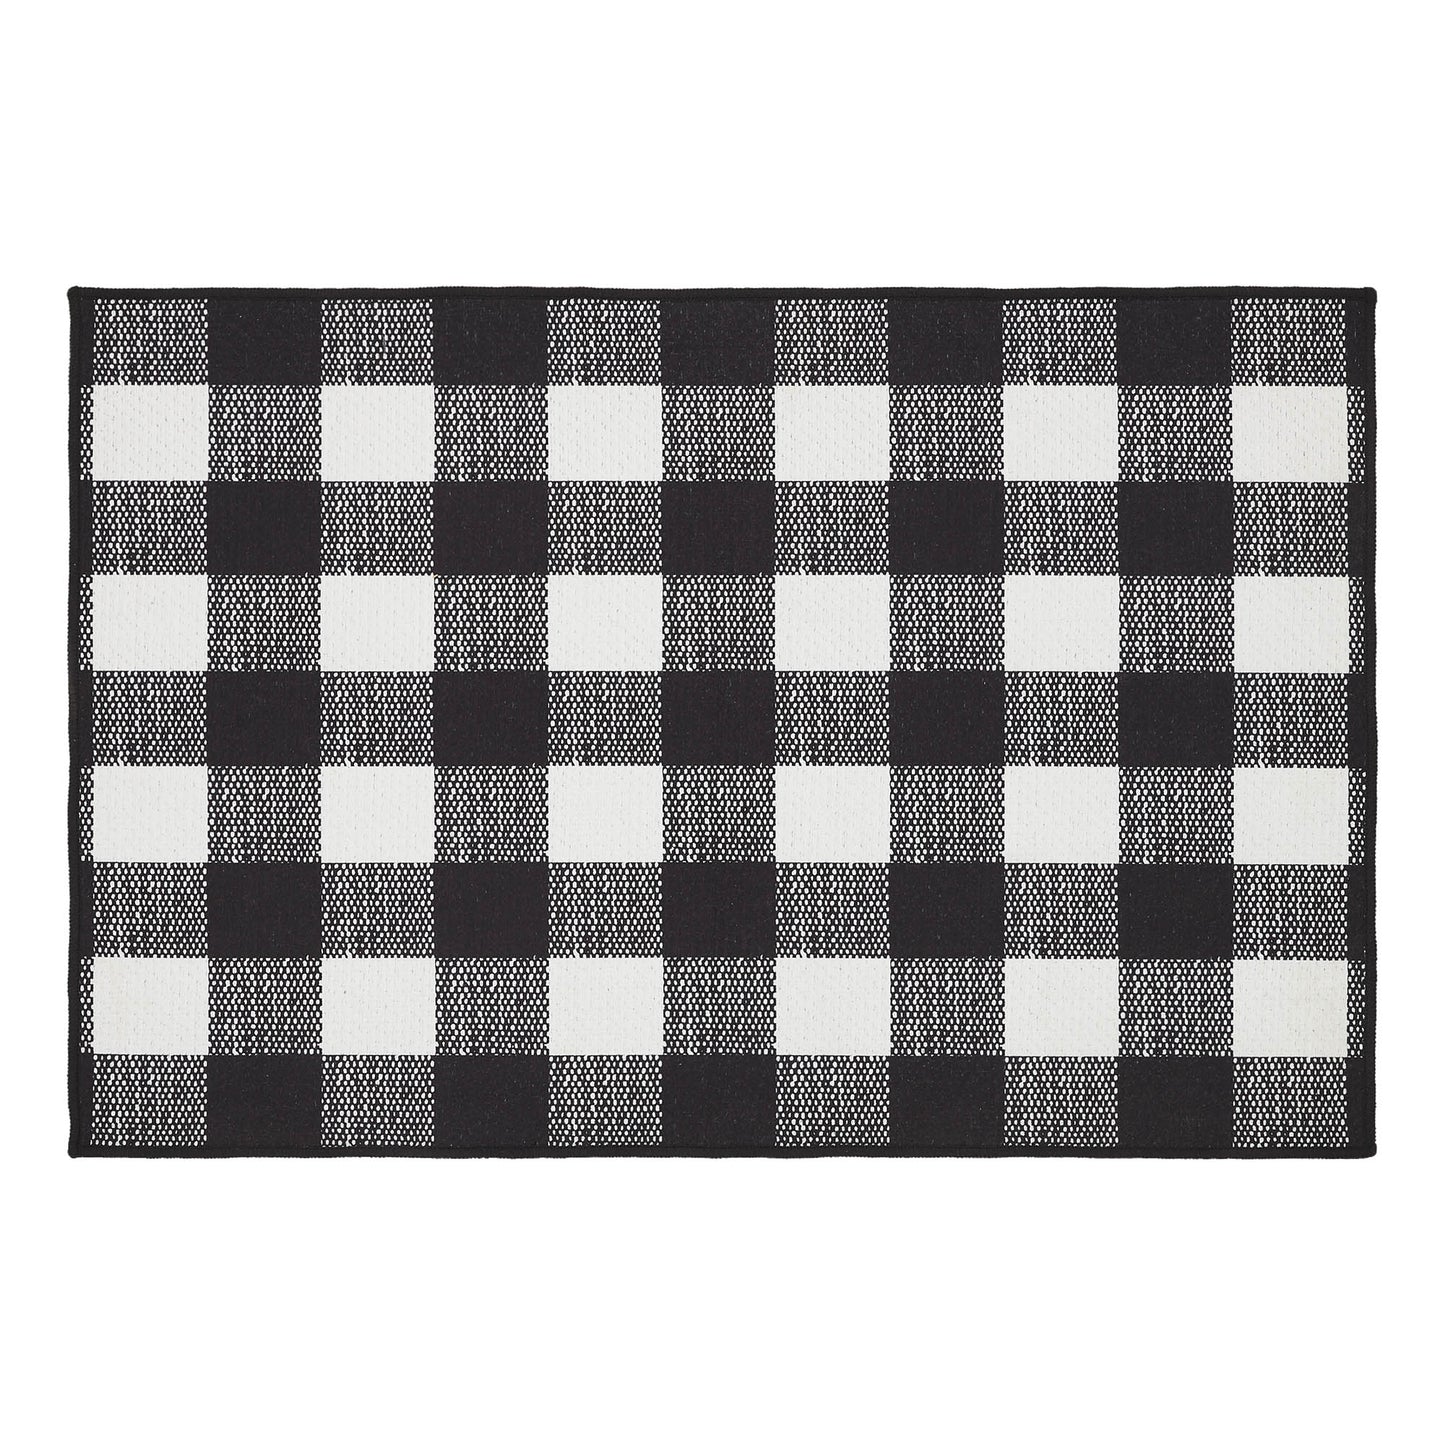 VHC Brands Annie Buffalo Check Black Indoor/Outdoor Rug Rect 24x36, Polyester Area Rug, Accent Rug, Floor Decor, Annie Buffalo Check Collection, Rectangle 24x36, Country Black